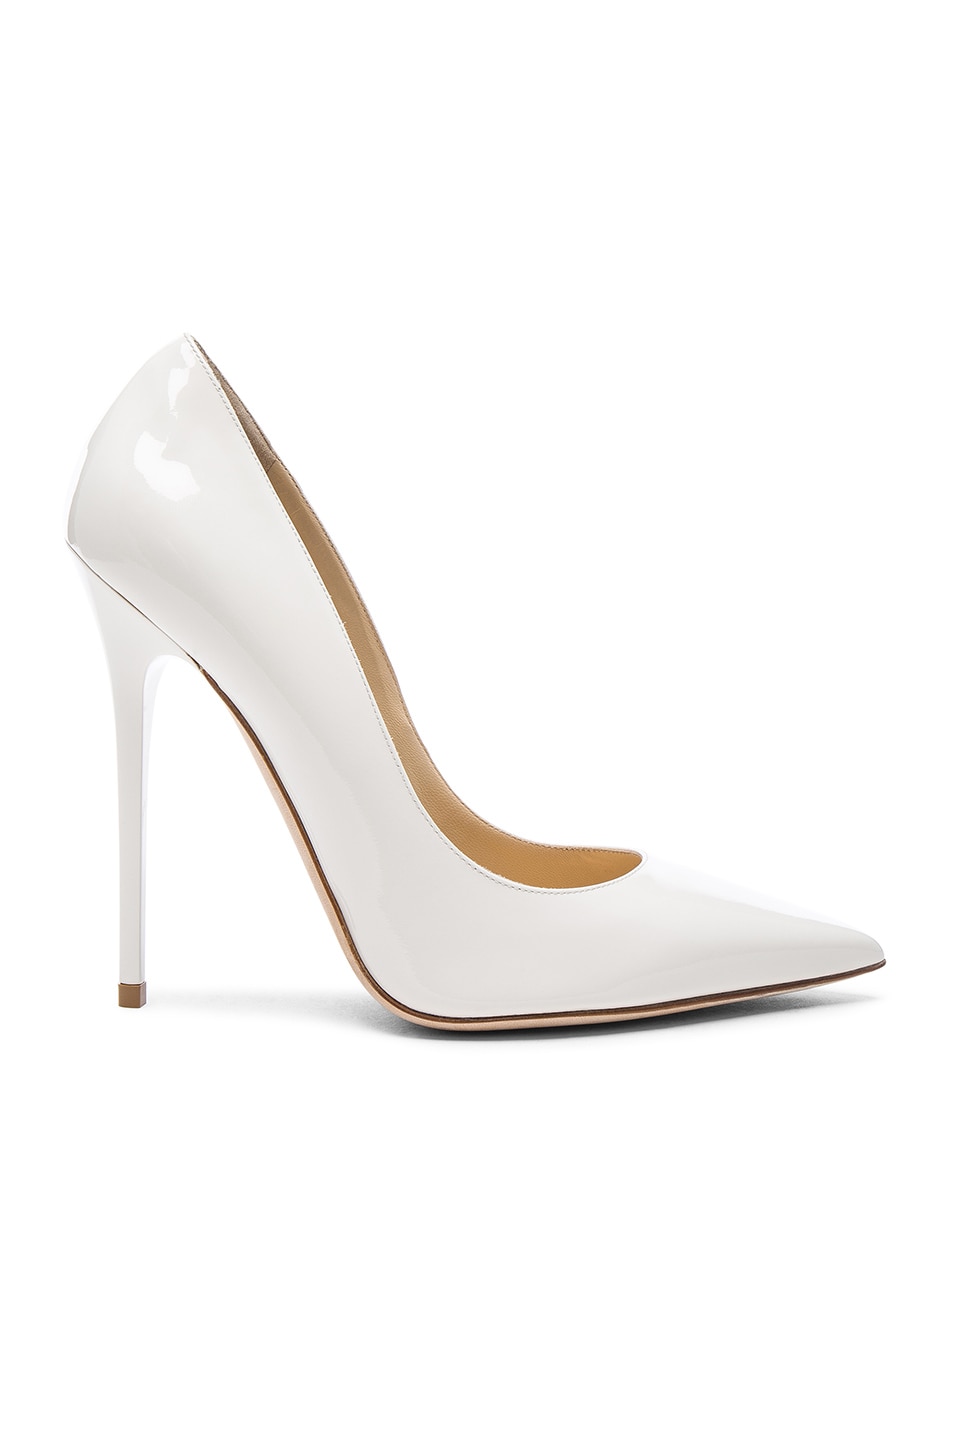 Image 1 of Jimmy Choo Patent Leather Anouk Pumps in Chalk